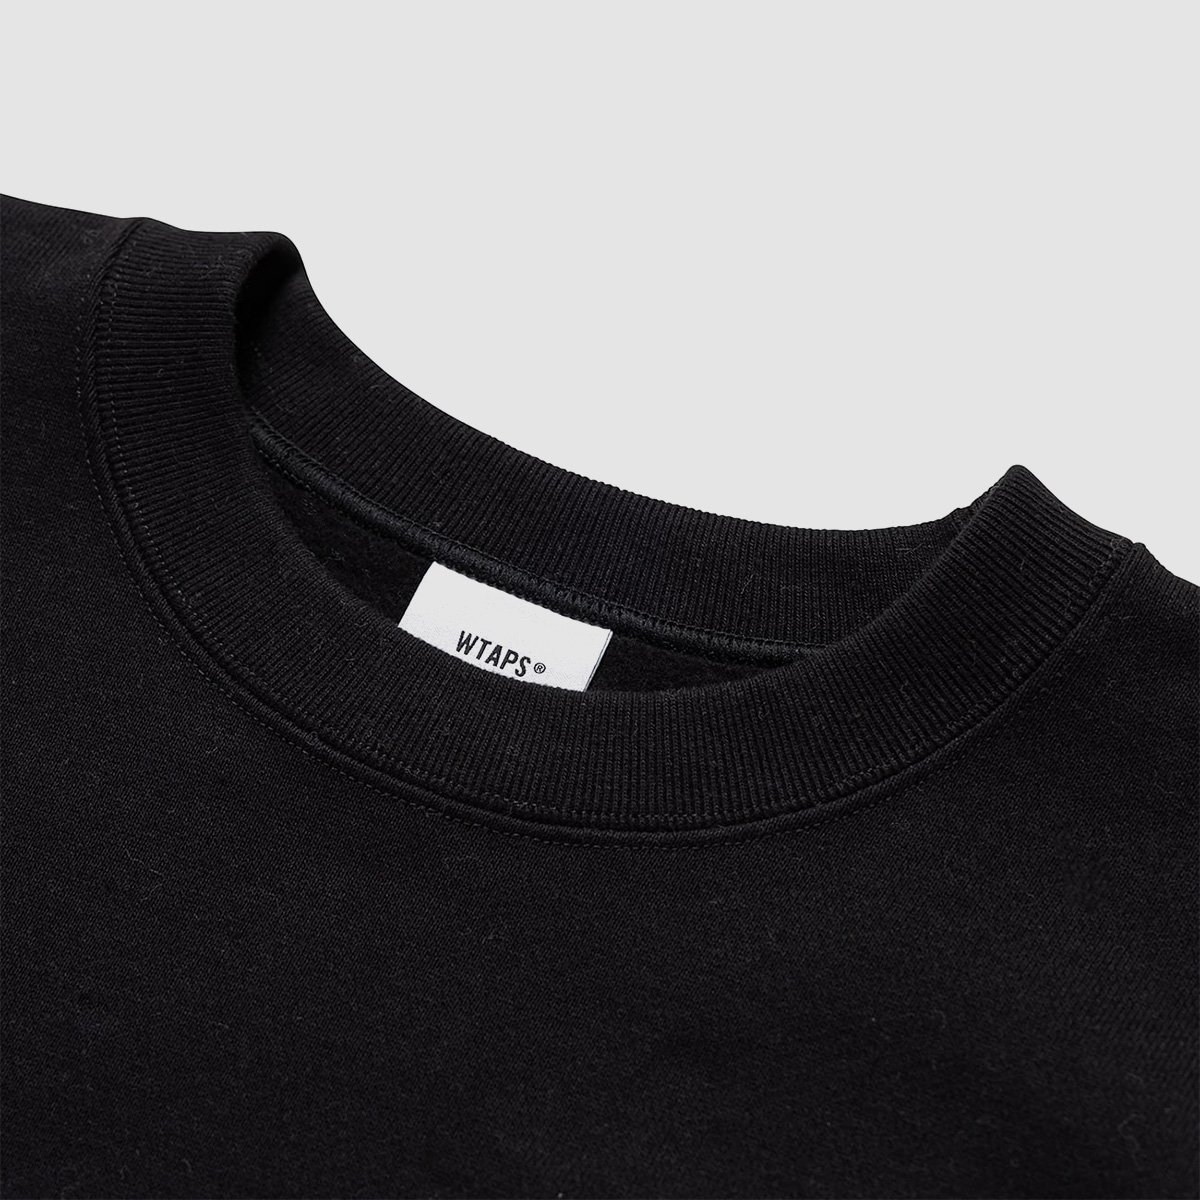 INVINCIBLE - INGREDIENTS / SWEATER / COTTON